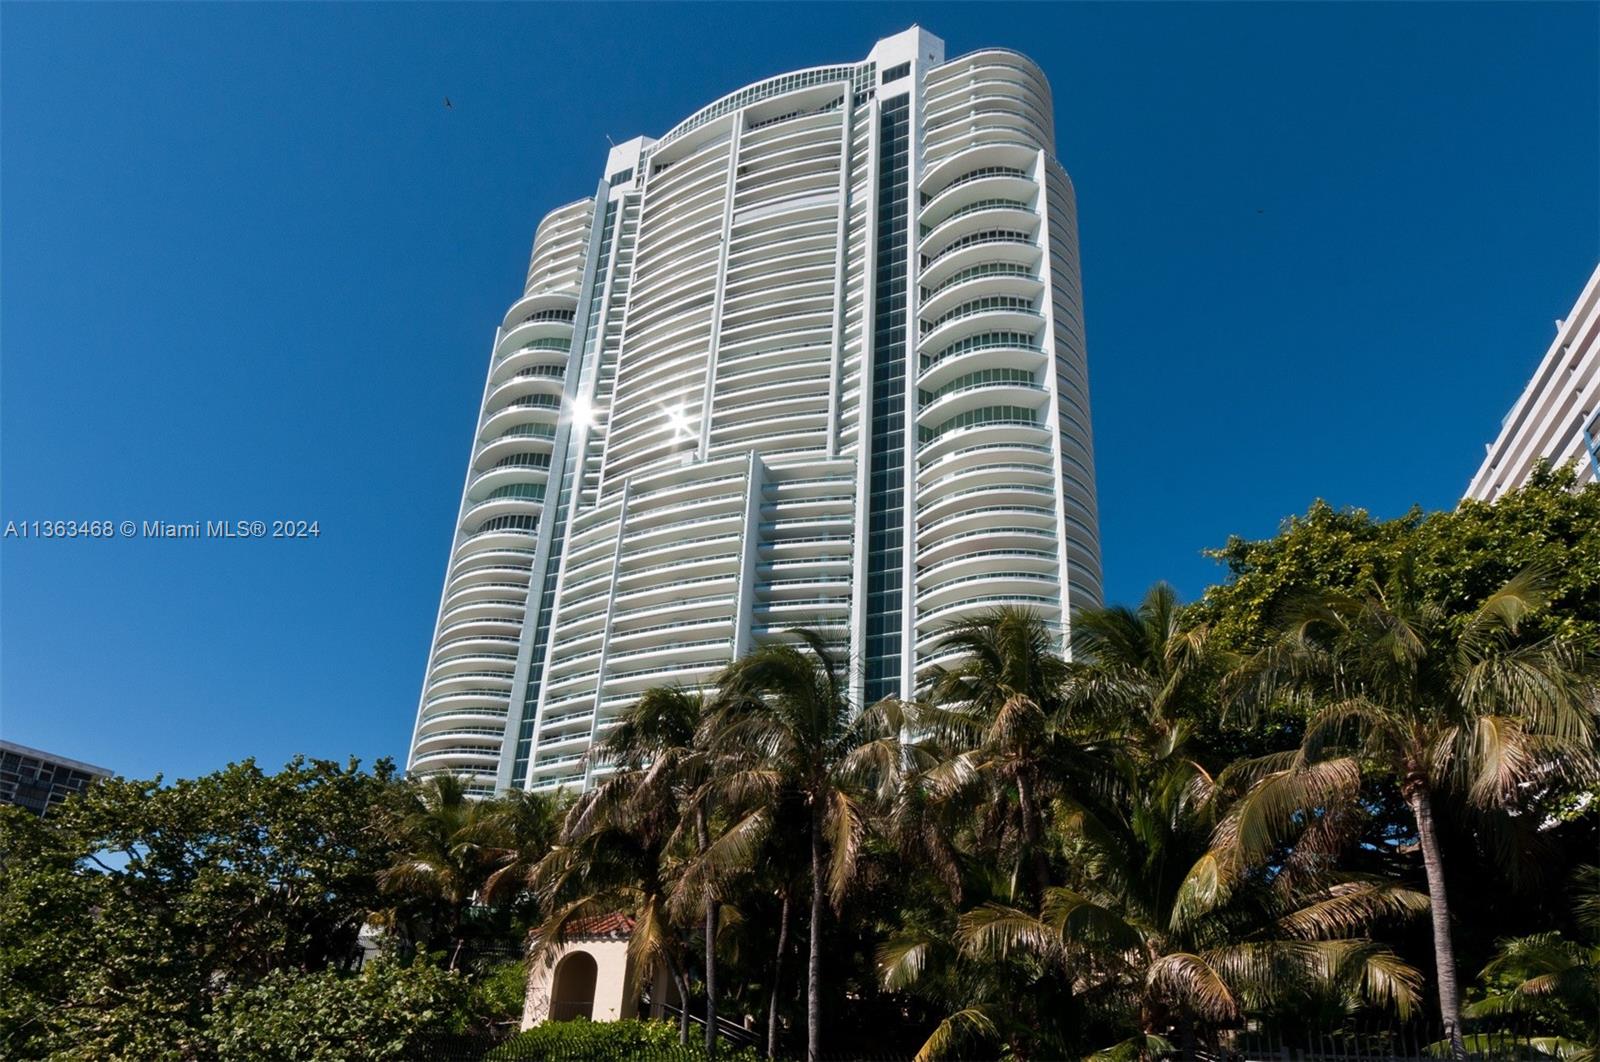 Discover breathtaking views of Biscayne Bay, the Atlantic Ocean, and the Miami skyline from this luxurious residence at Santa Maria. Experience private living with your very own elevator/foyer and immerse yourself in the generously sized 2 beds and 3.5 baths with 2,580sqft of living area. Enjoy an impressive 562sqft of total terraces. Featuring wood and marble floors that bring elegance to your daily routine. A gourmet Italian Snaidero kitchen equipped with top-of-the-line Subzero and Gaggenau appliances. Delight in large walk-in closets, his & her's bath, a separate laundry room, storage room, and 2 assigned parking spaces that provide ample convenience for a comfortable lifestyle. Don't miss out on the opportunity to own this remarkable find at Santa Maria!